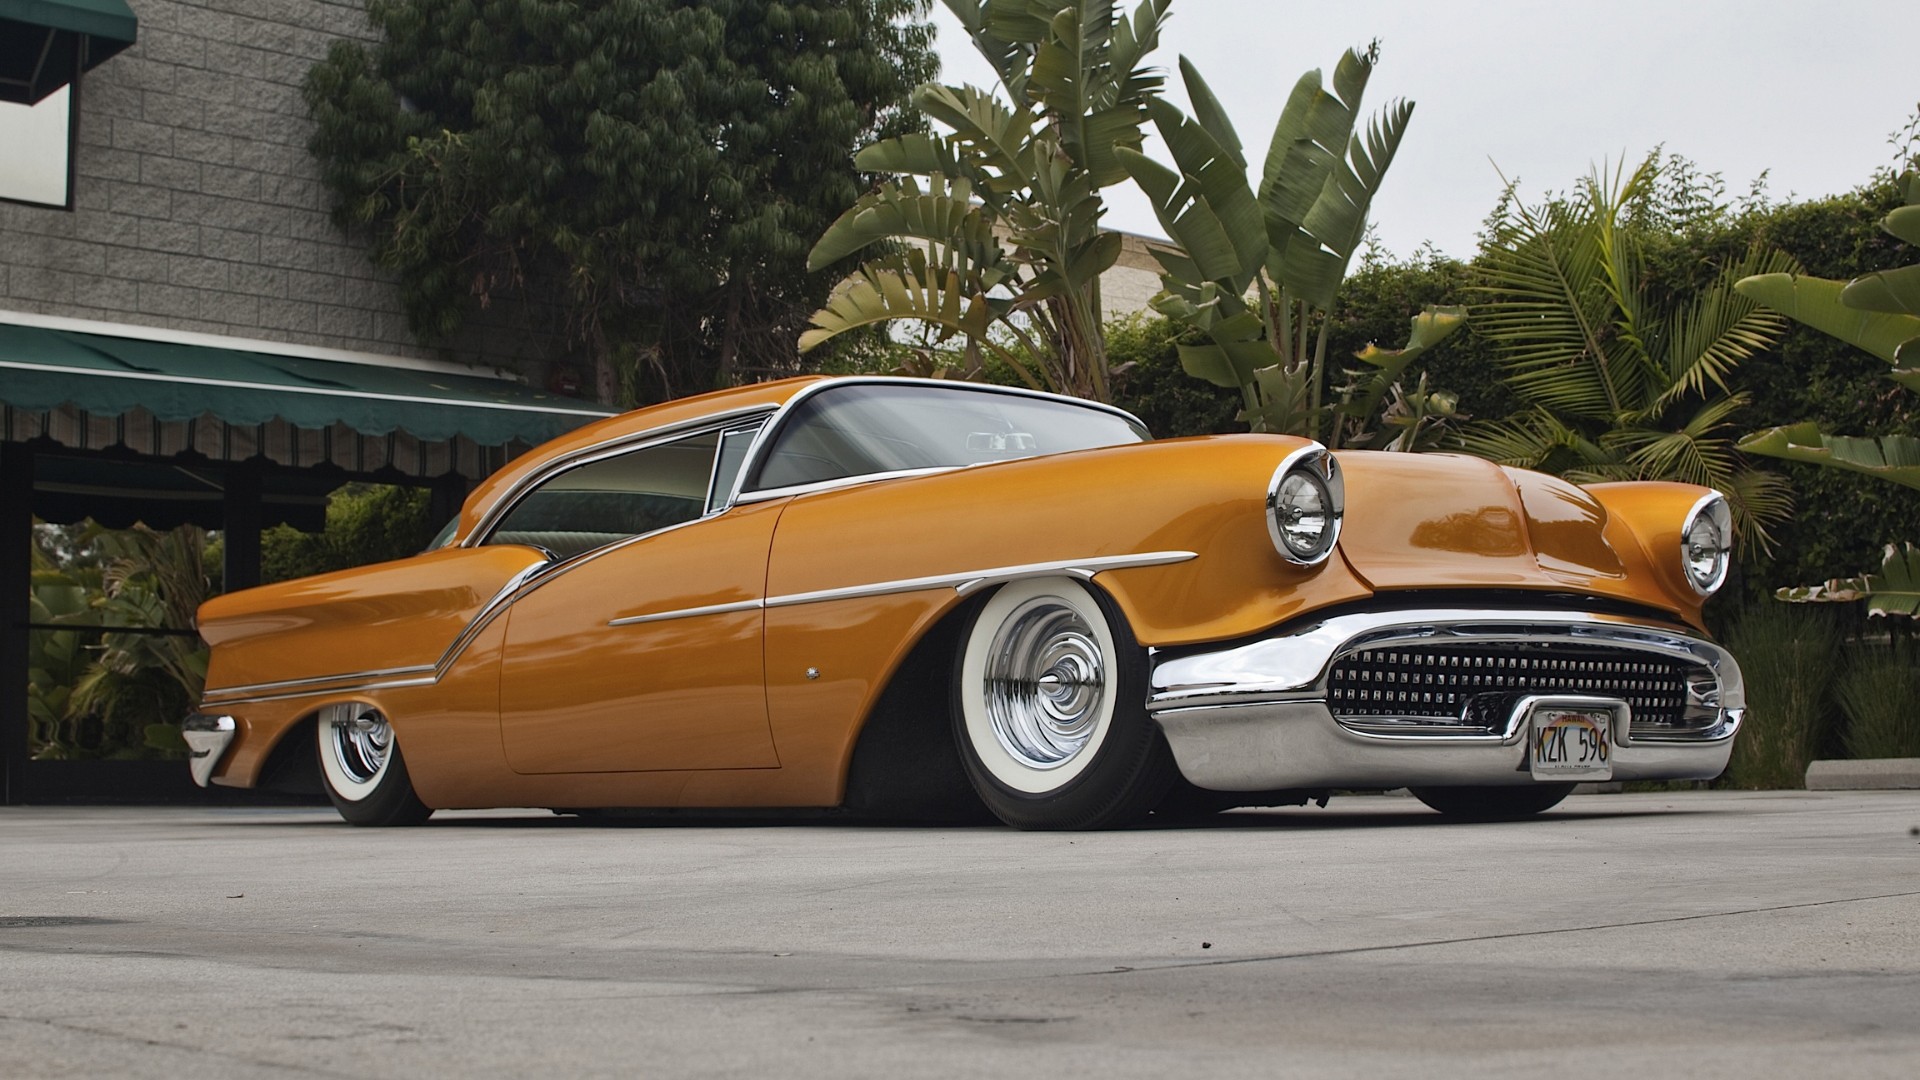 Lowrider Cars Wallpapers Images amp Pictures   Becuo